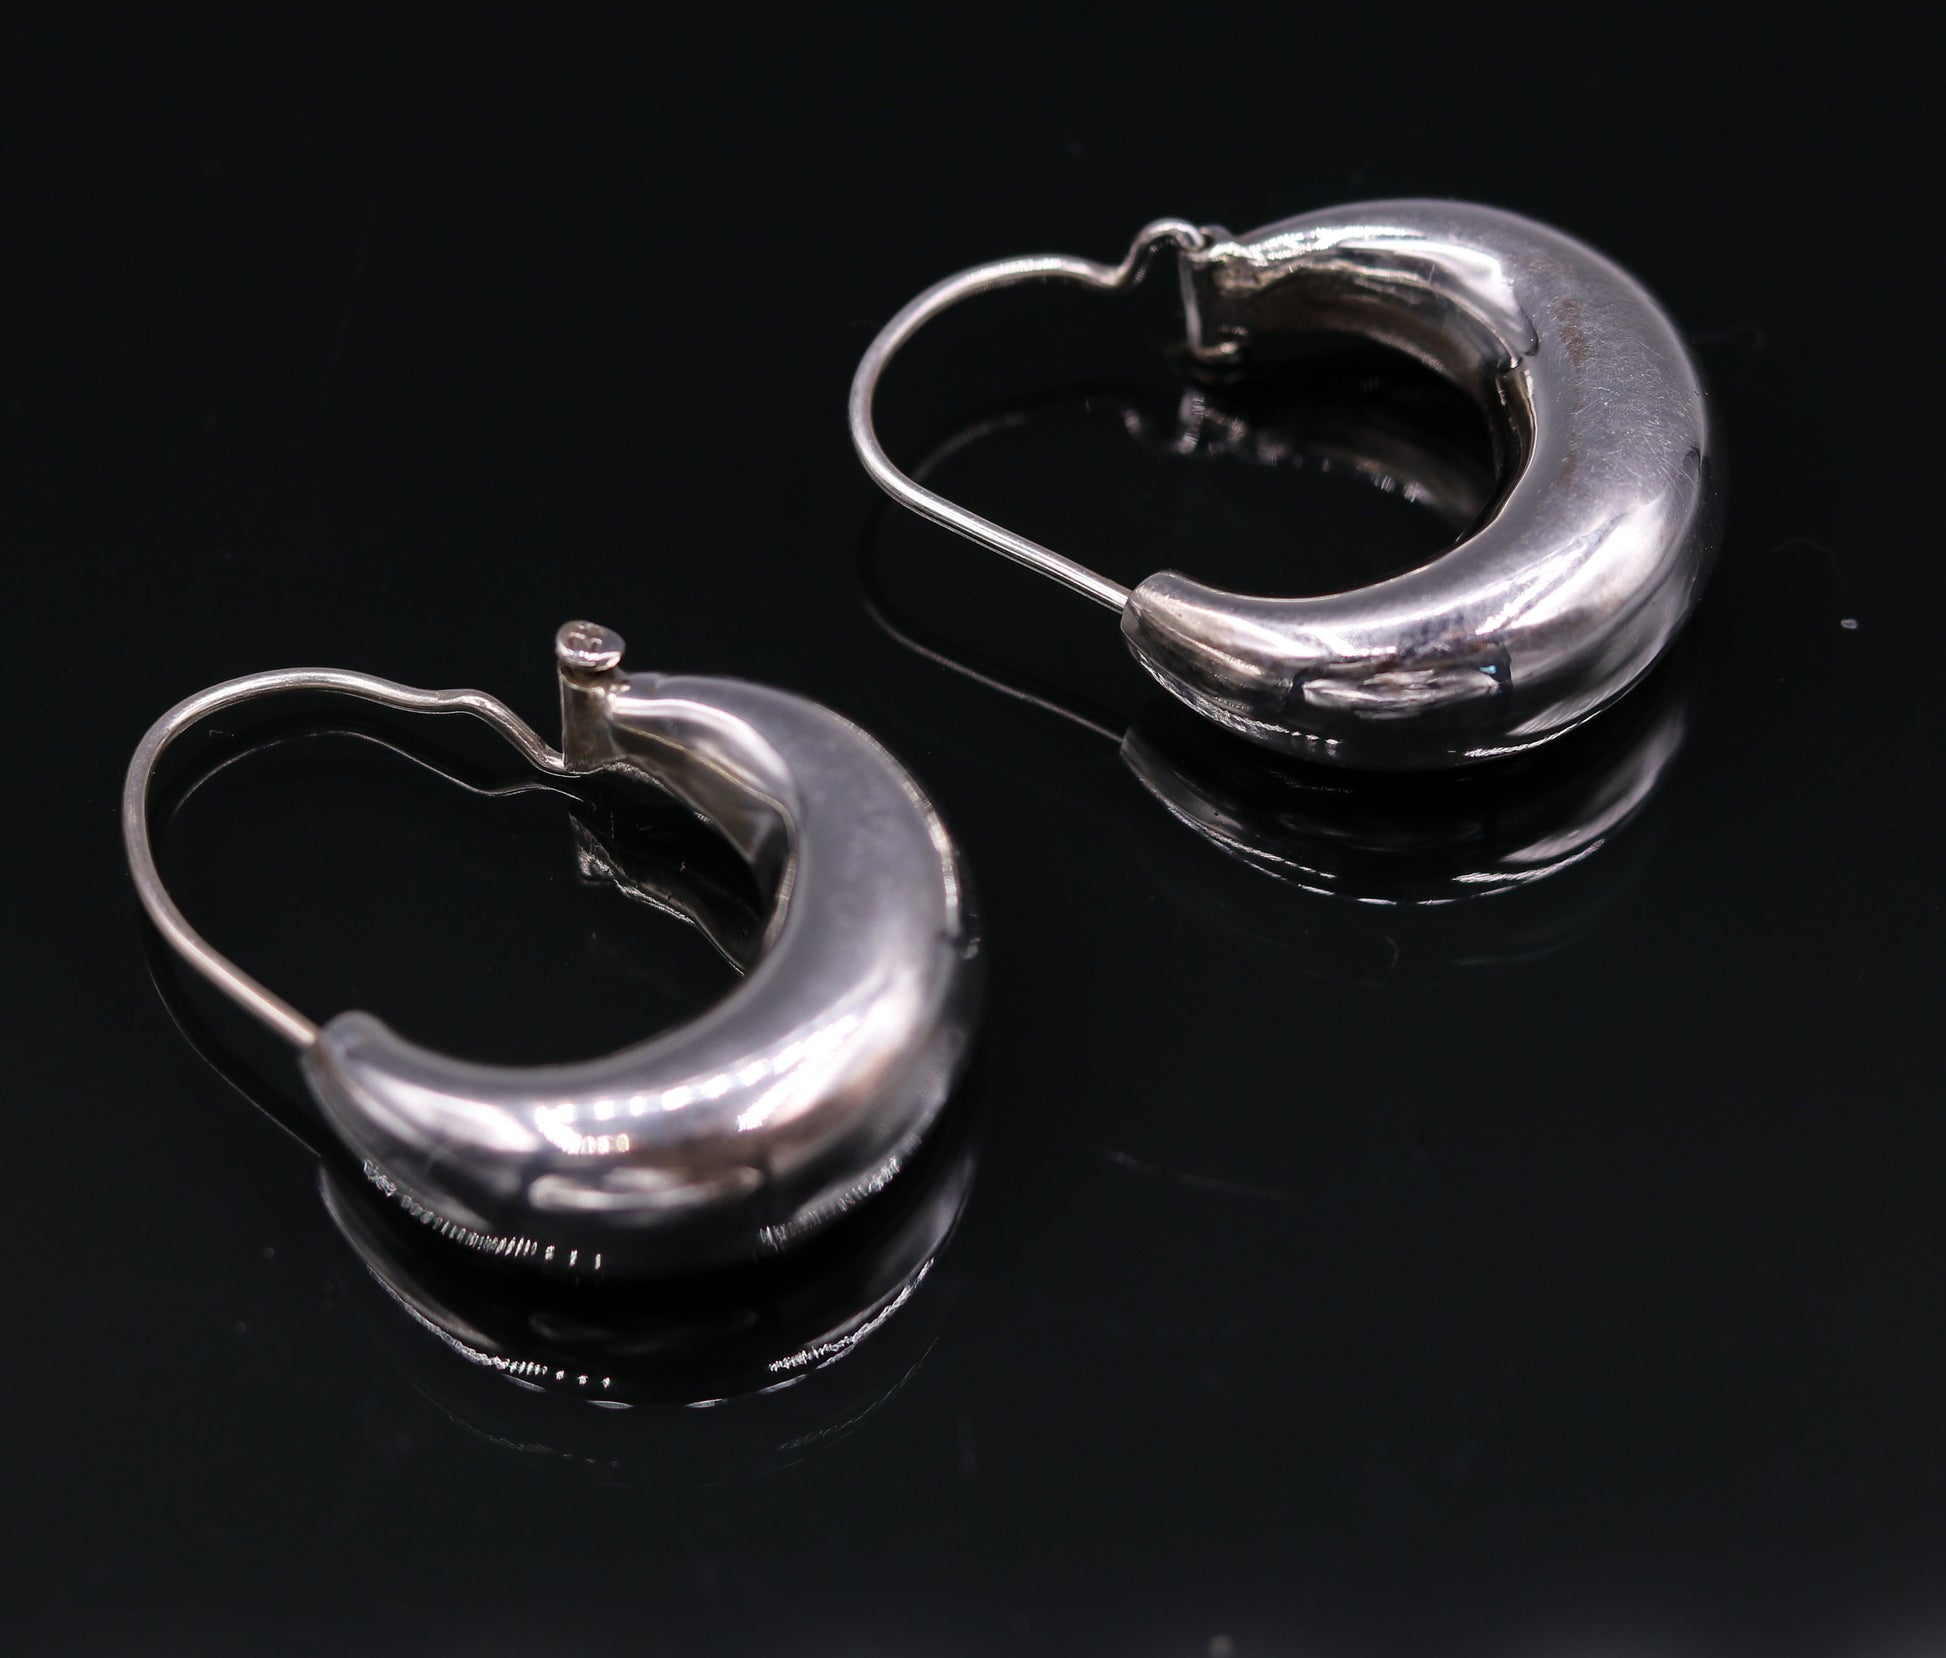 Indian traditional style 925 sterling pure silver handmade vintage style hoops earrings kundal, ethnic bali tribal jewelry from india s588 - TRIBAL ORNAMENTS